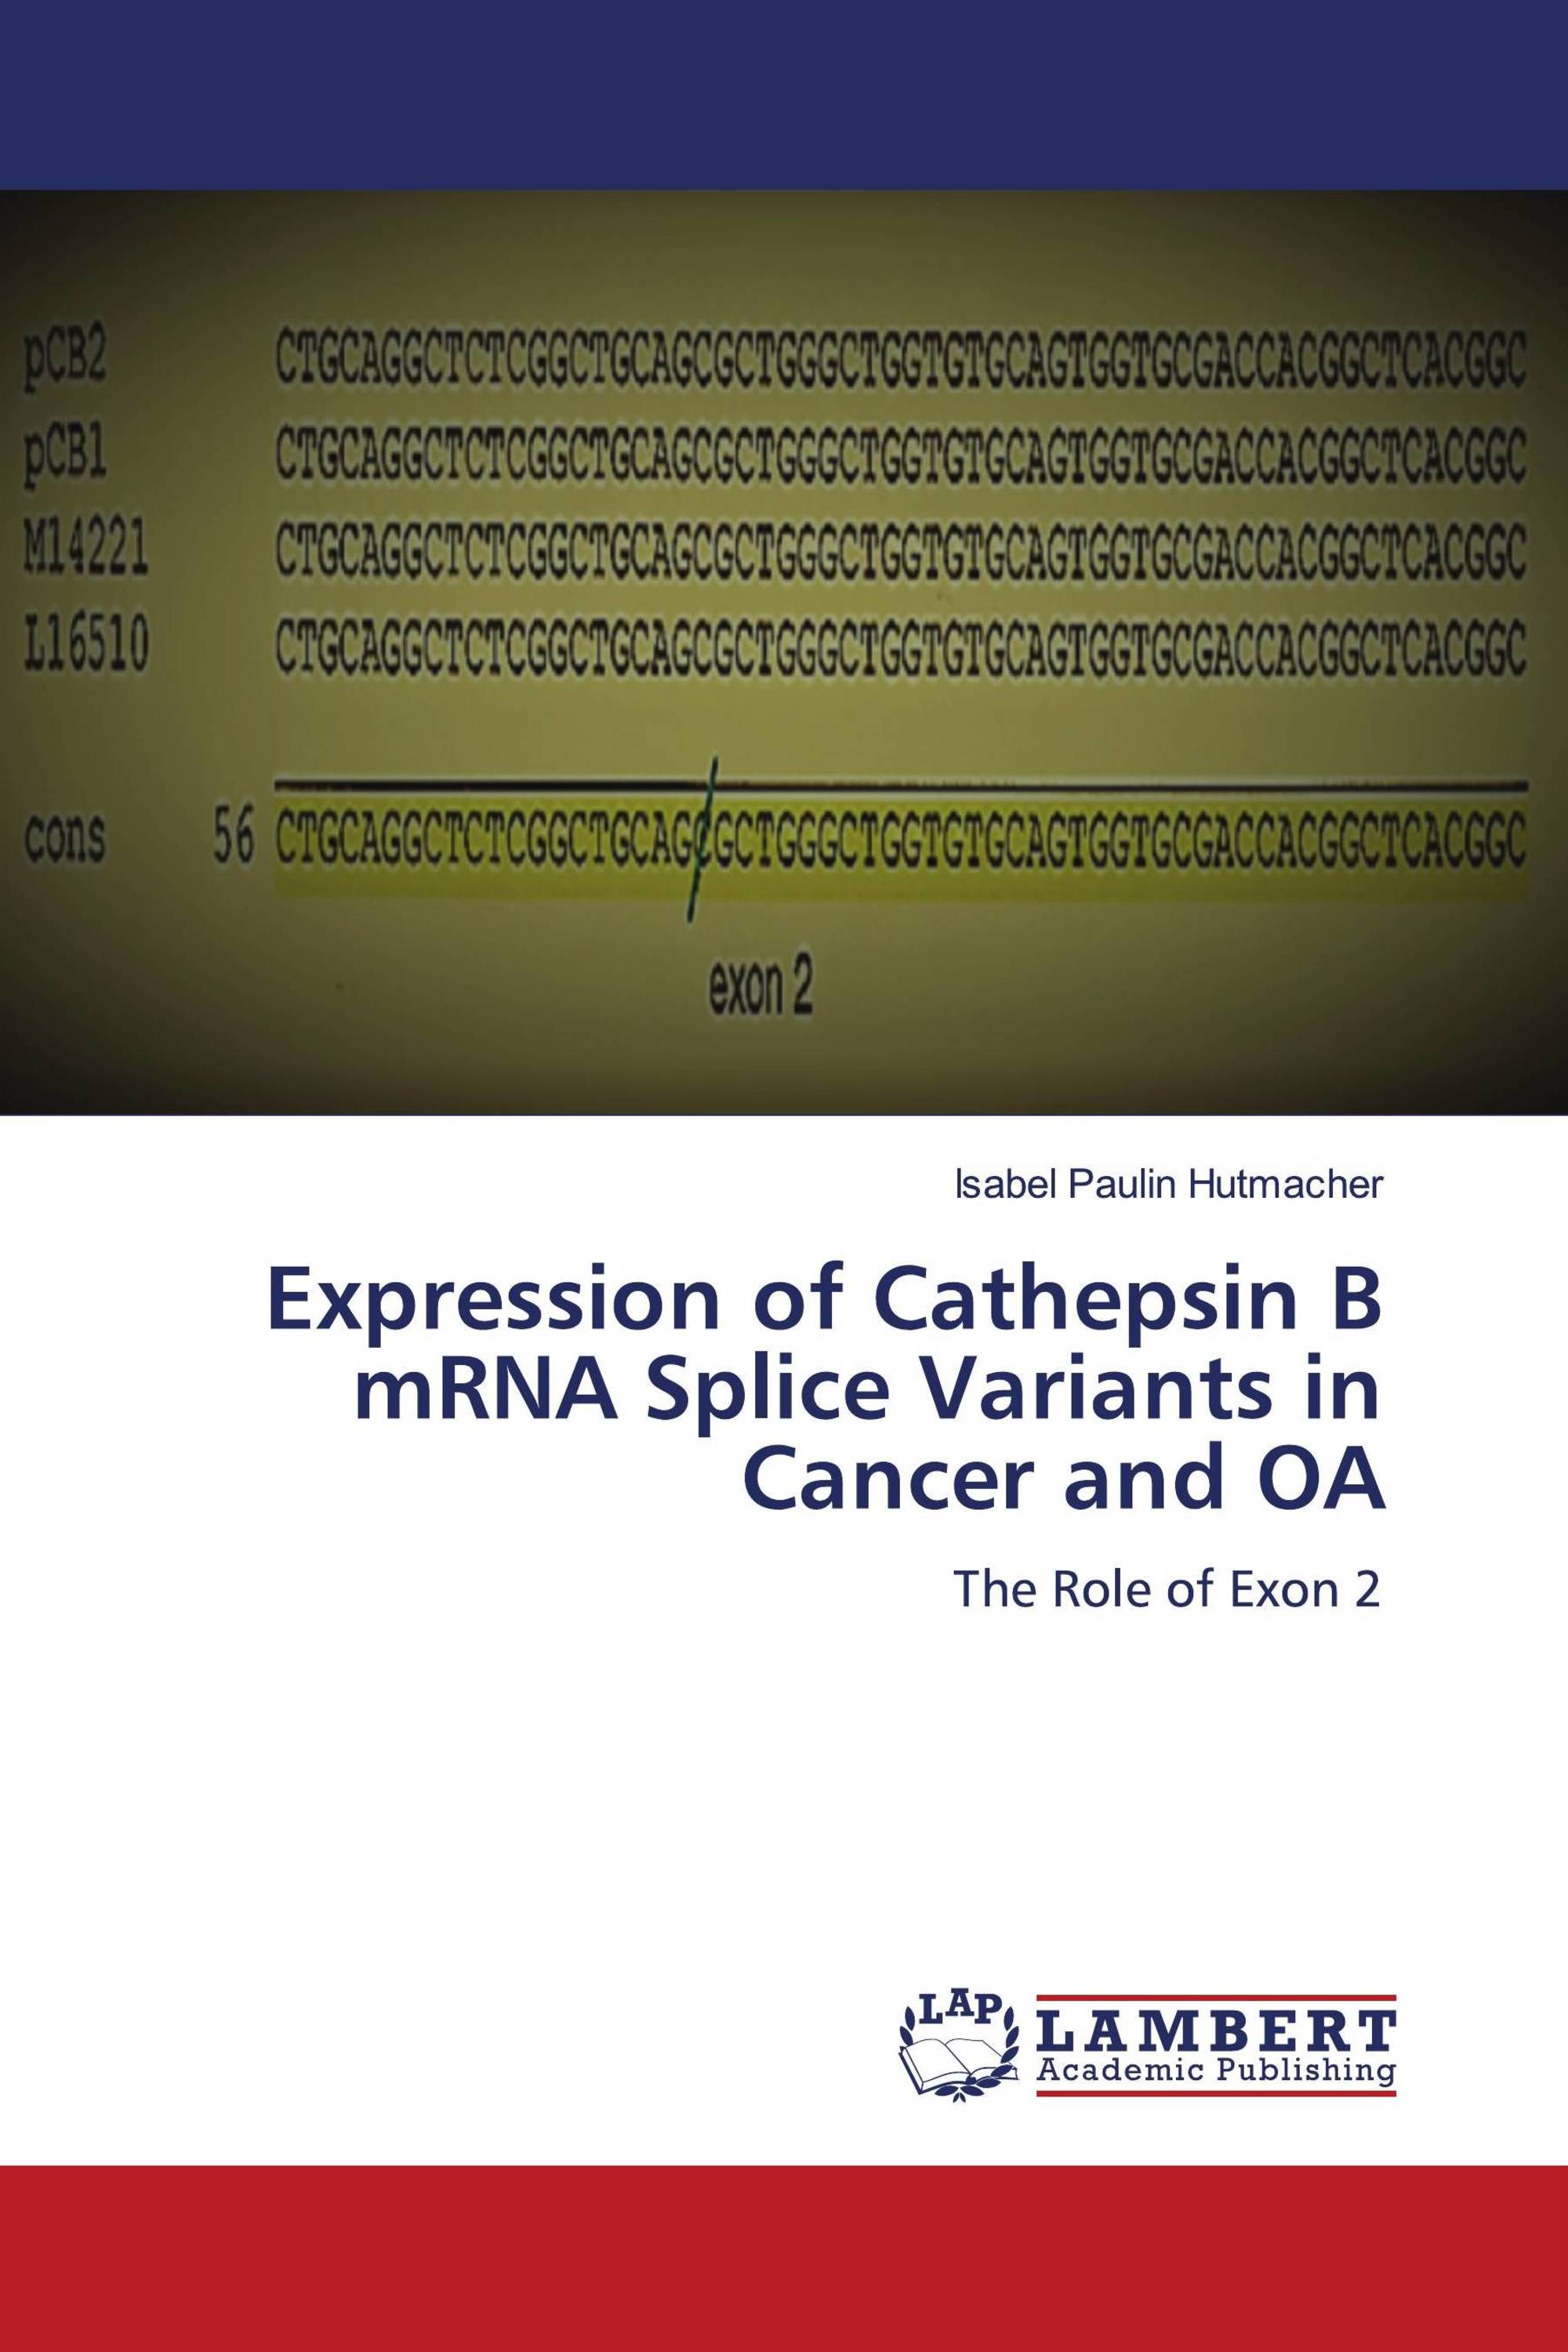 Expression of Cathepsin B mRNA Splice Variants in Cancer and OA